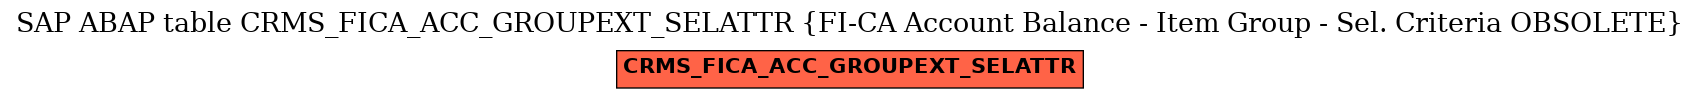 E-R Diagram for table CRMS_FICA_ACC_GROUPEXT_SELATTR (FI-CA Account Balance - Item Group - Sel. Criteria OBSOLETE)